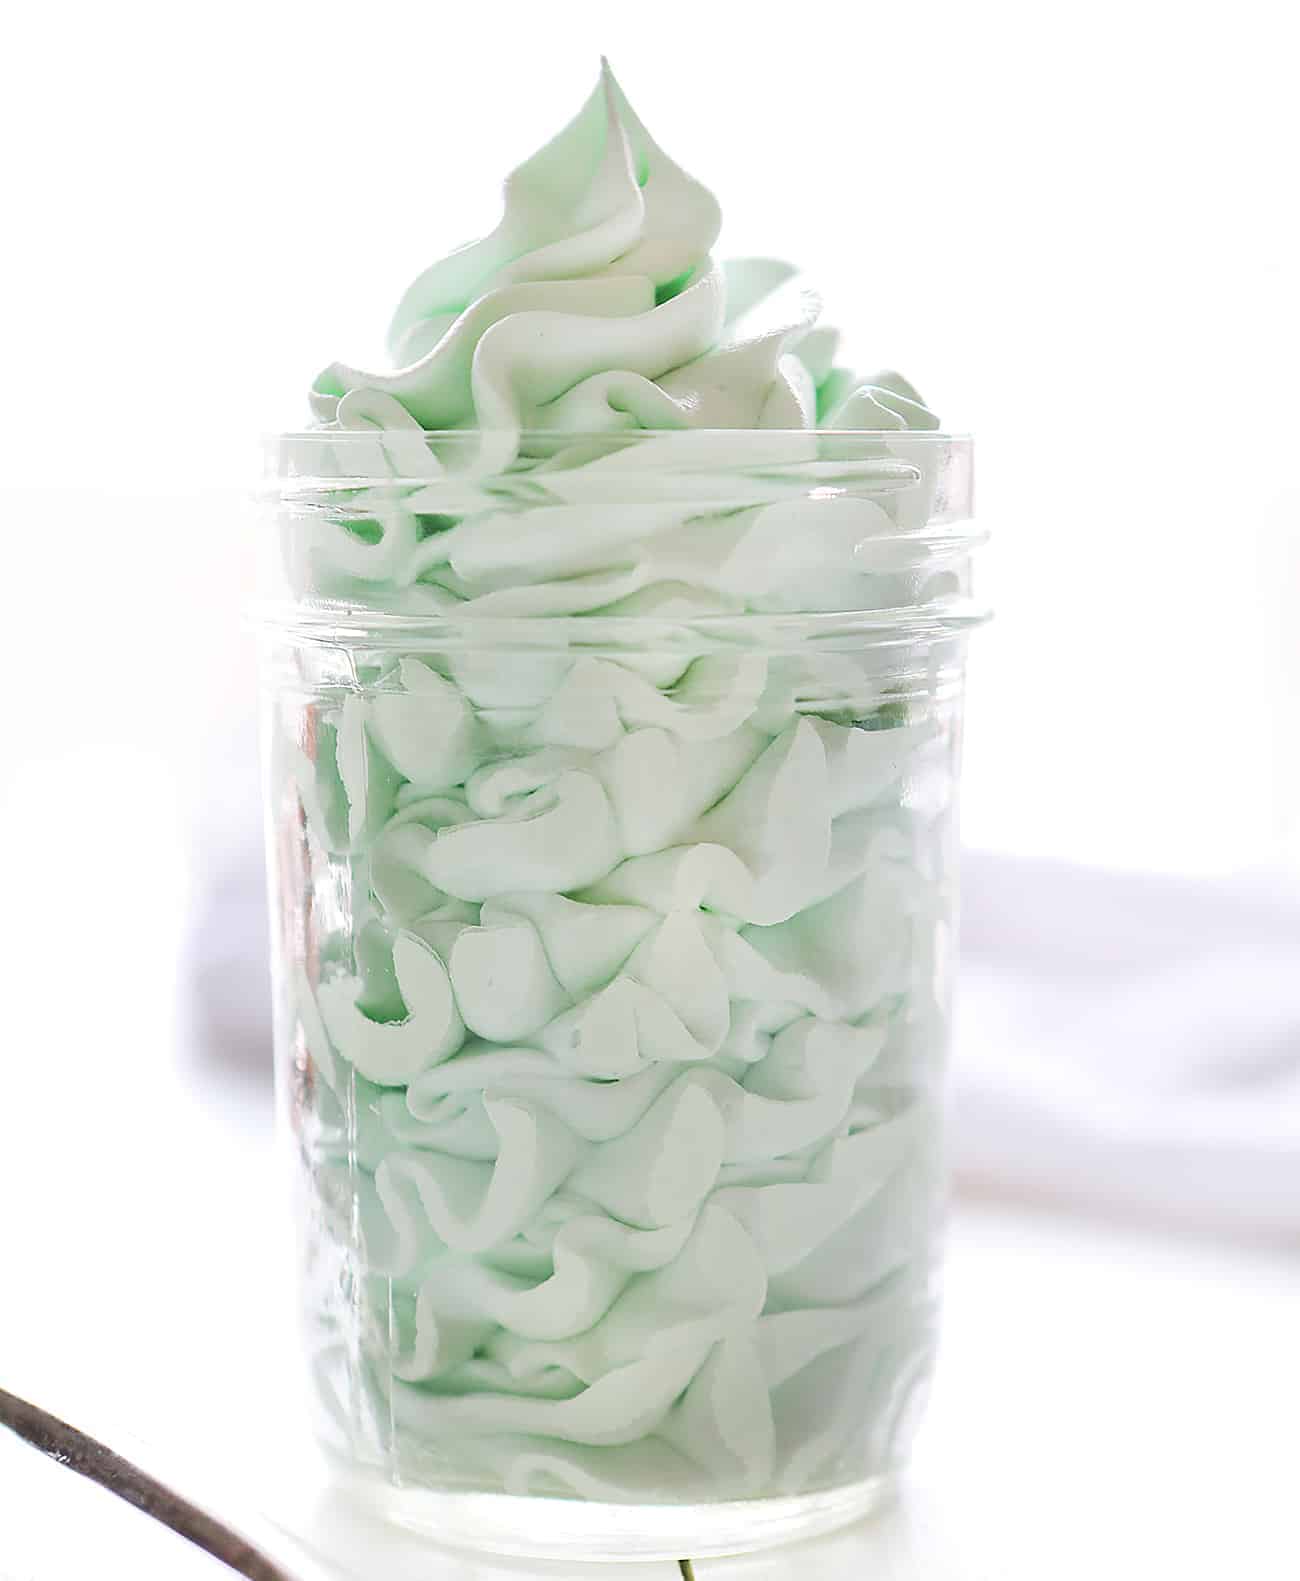 Jar of Piped Peppermint Whipped Cream